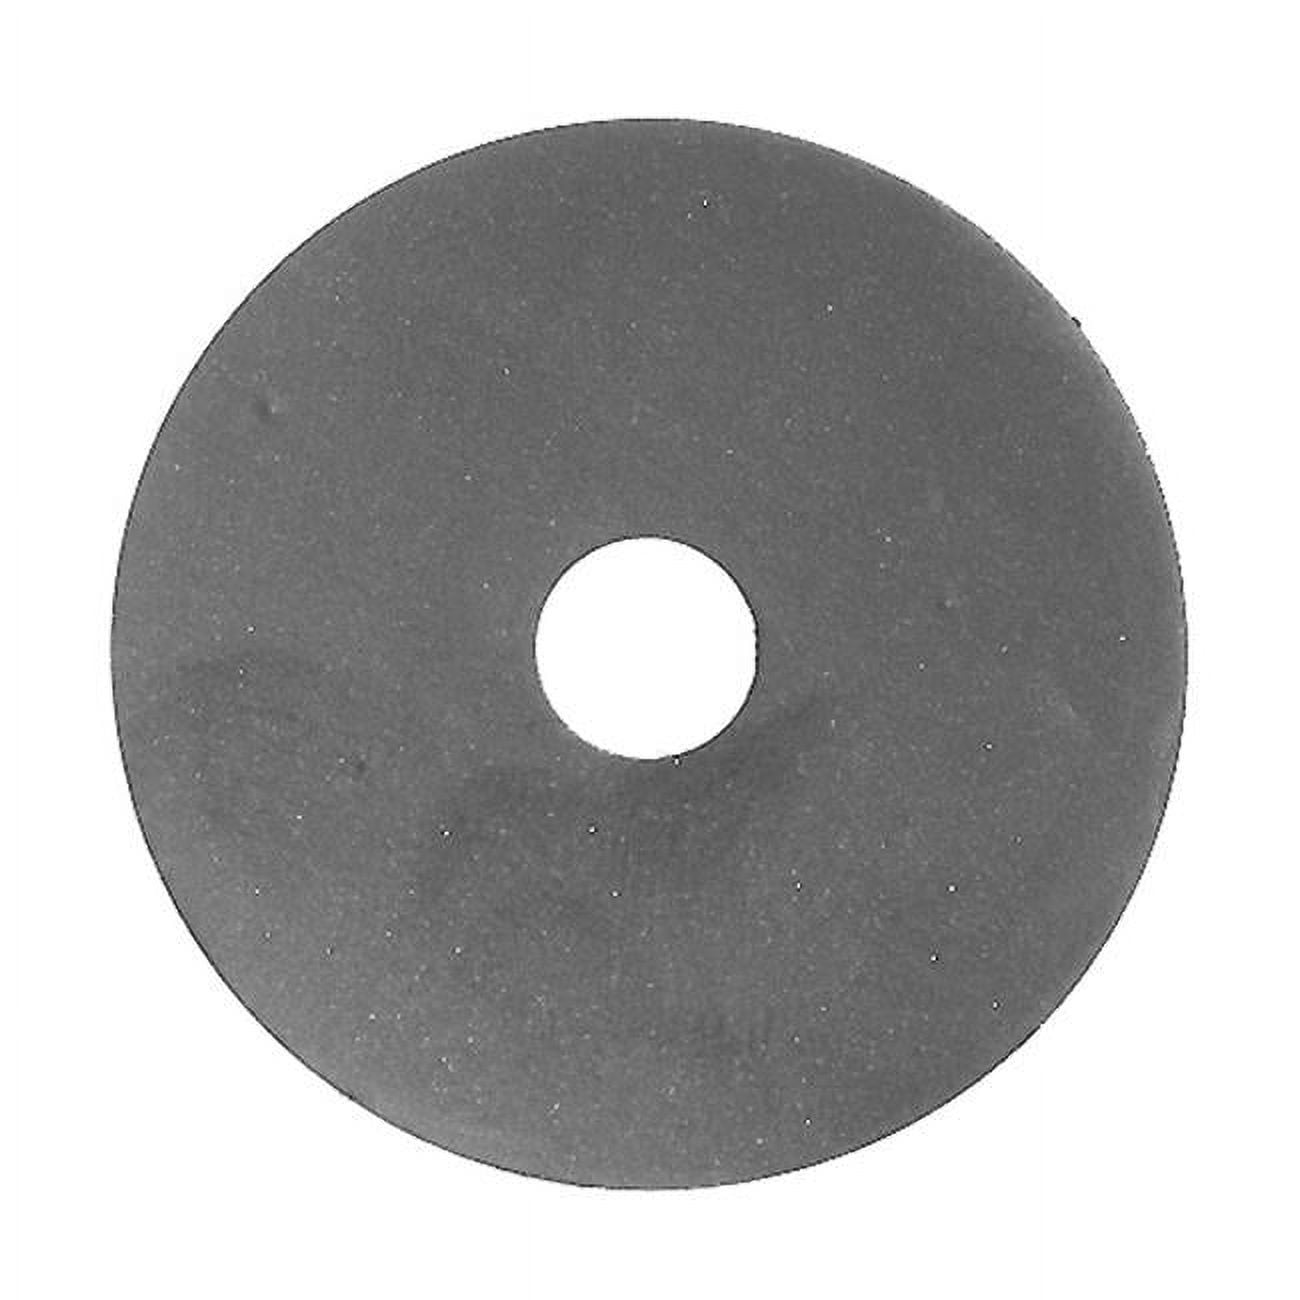 61810b 1.5 X 0.31 In. Rubber Flat Washer- Pack Of 5